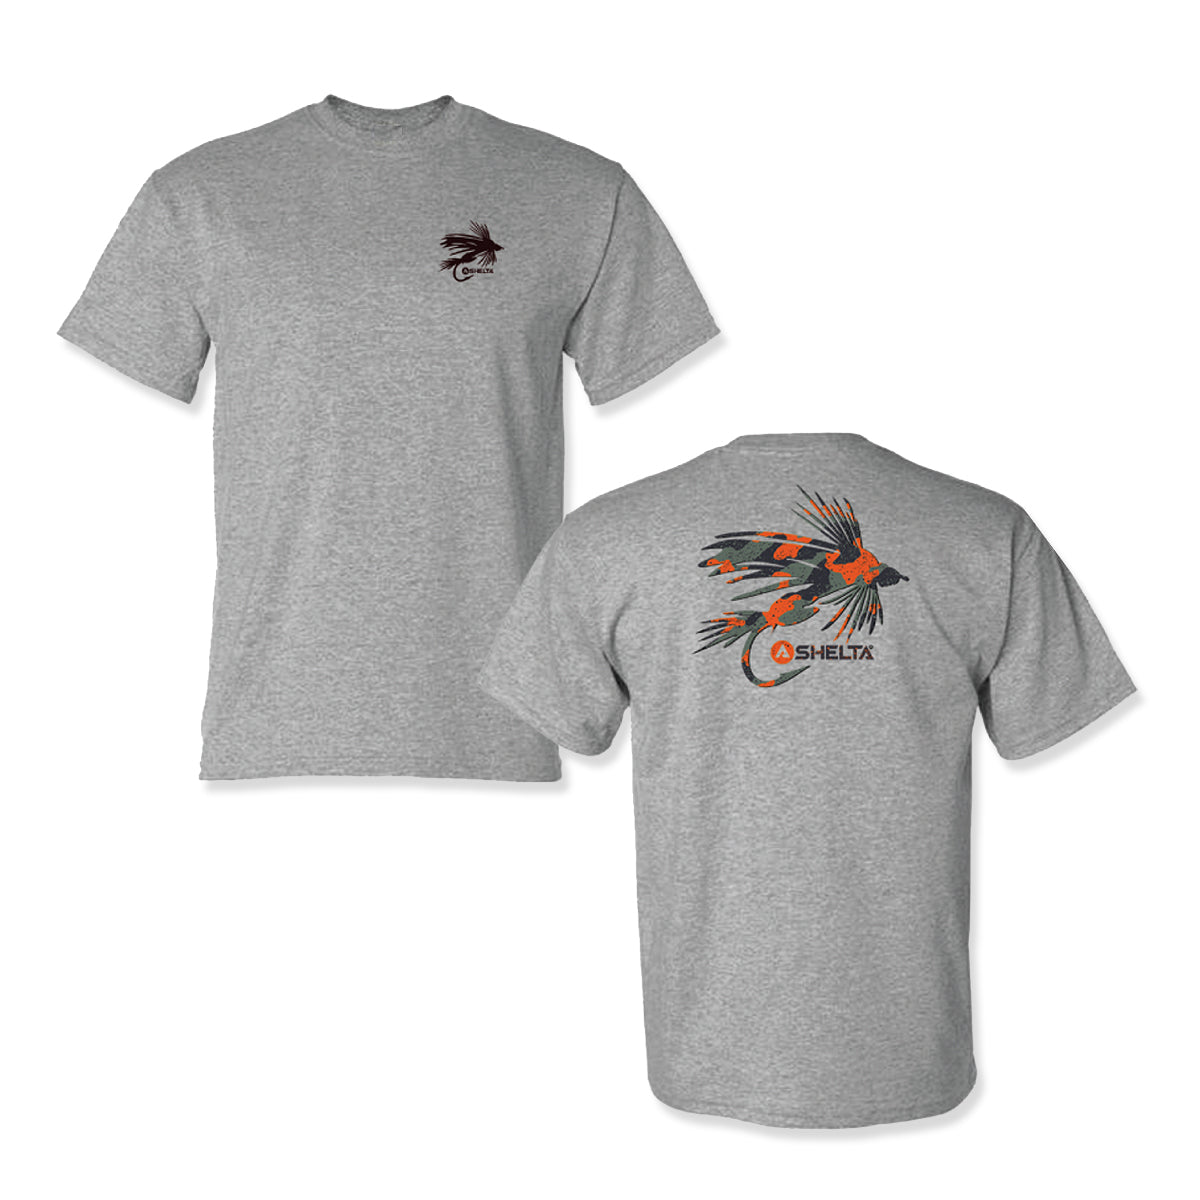 Fly Logo in Sport Grey Heather. This heavy-duty 50/50 T-Shirt is made to work for you. This fabric is specifically designed to wick moisture away from the body, helping to keep you dry and cool. Soft, preshrunk cotton is blended with durable, colorfast polyester for optimal quality